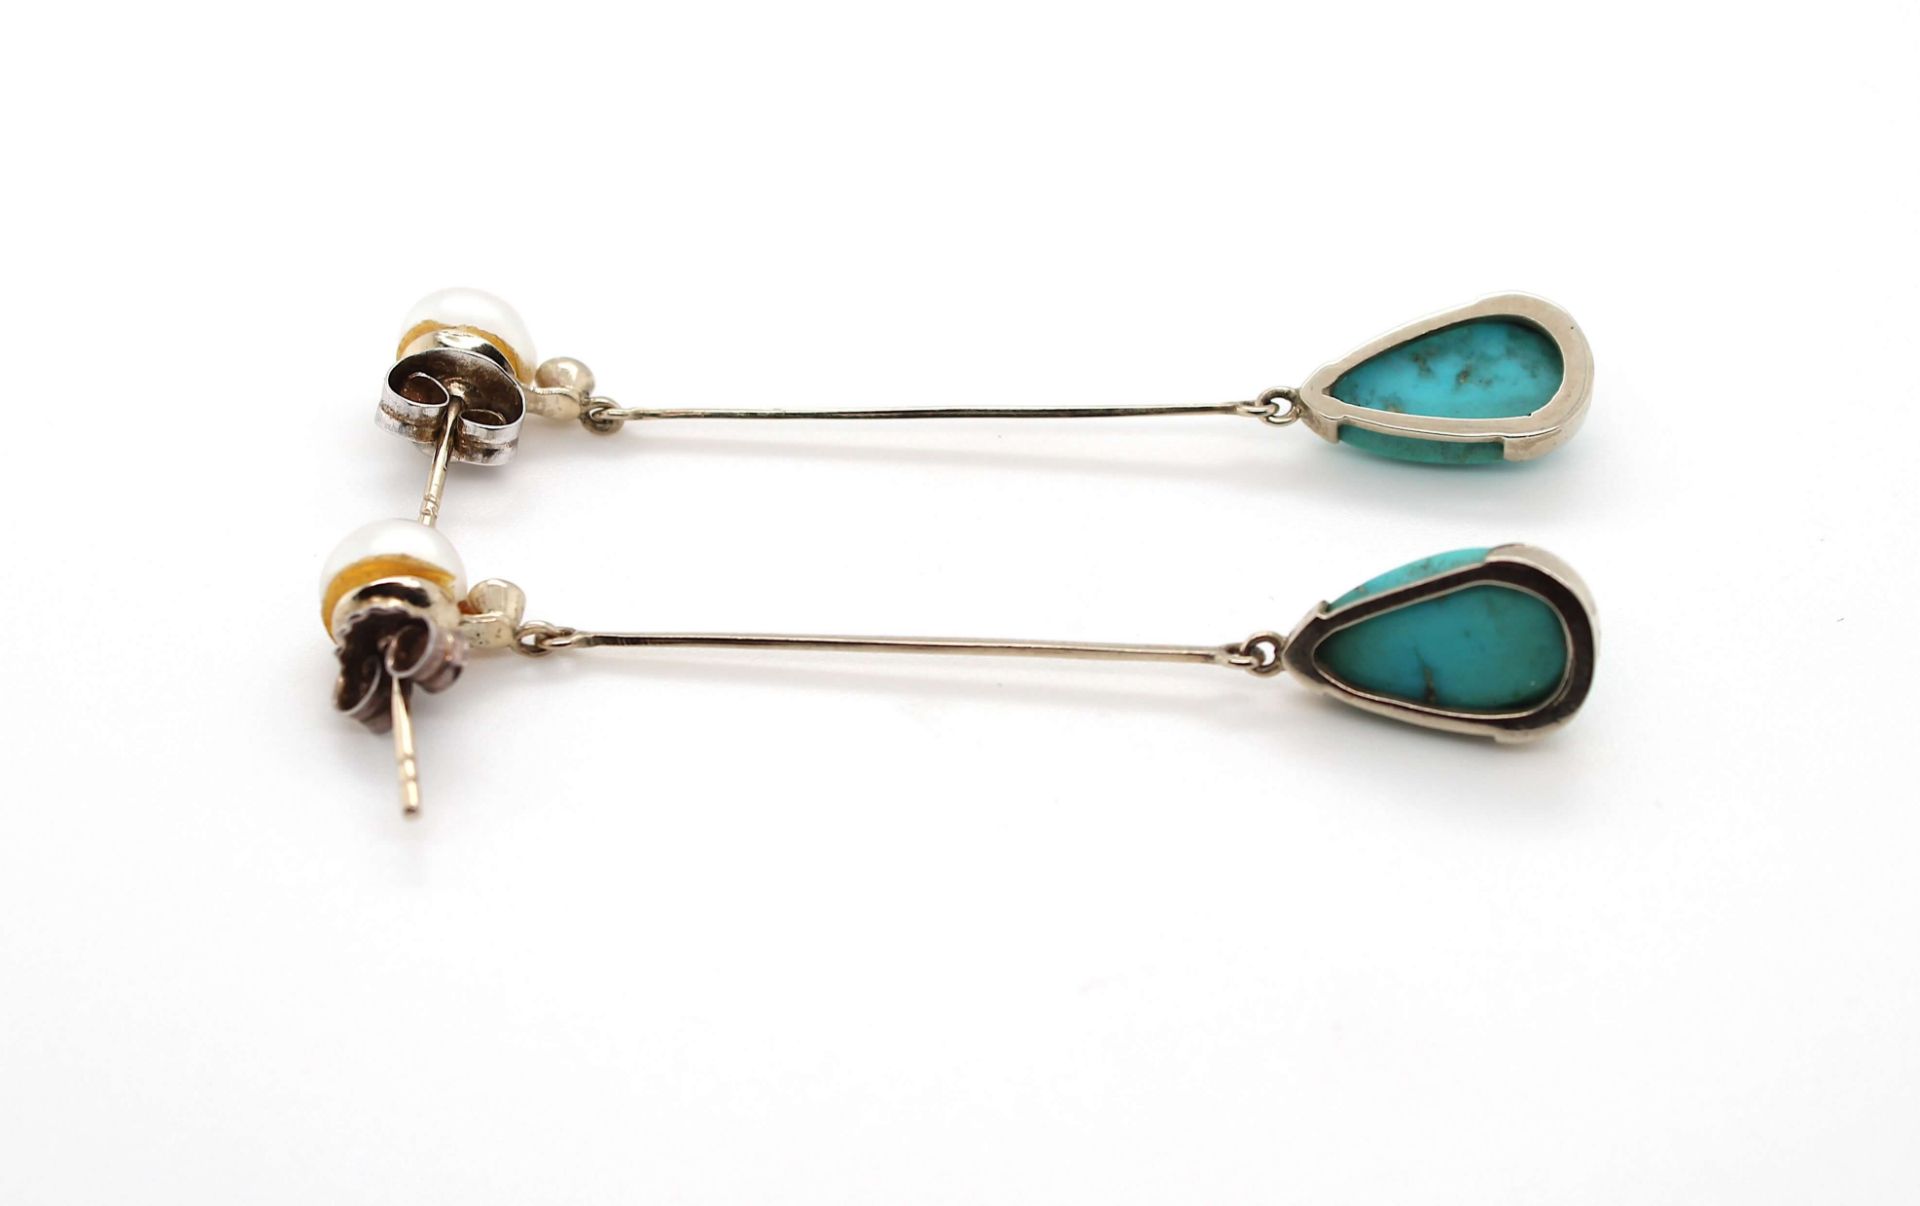 Earrings with turquoise, cultured pearls and brilliants - Image 3 of 3